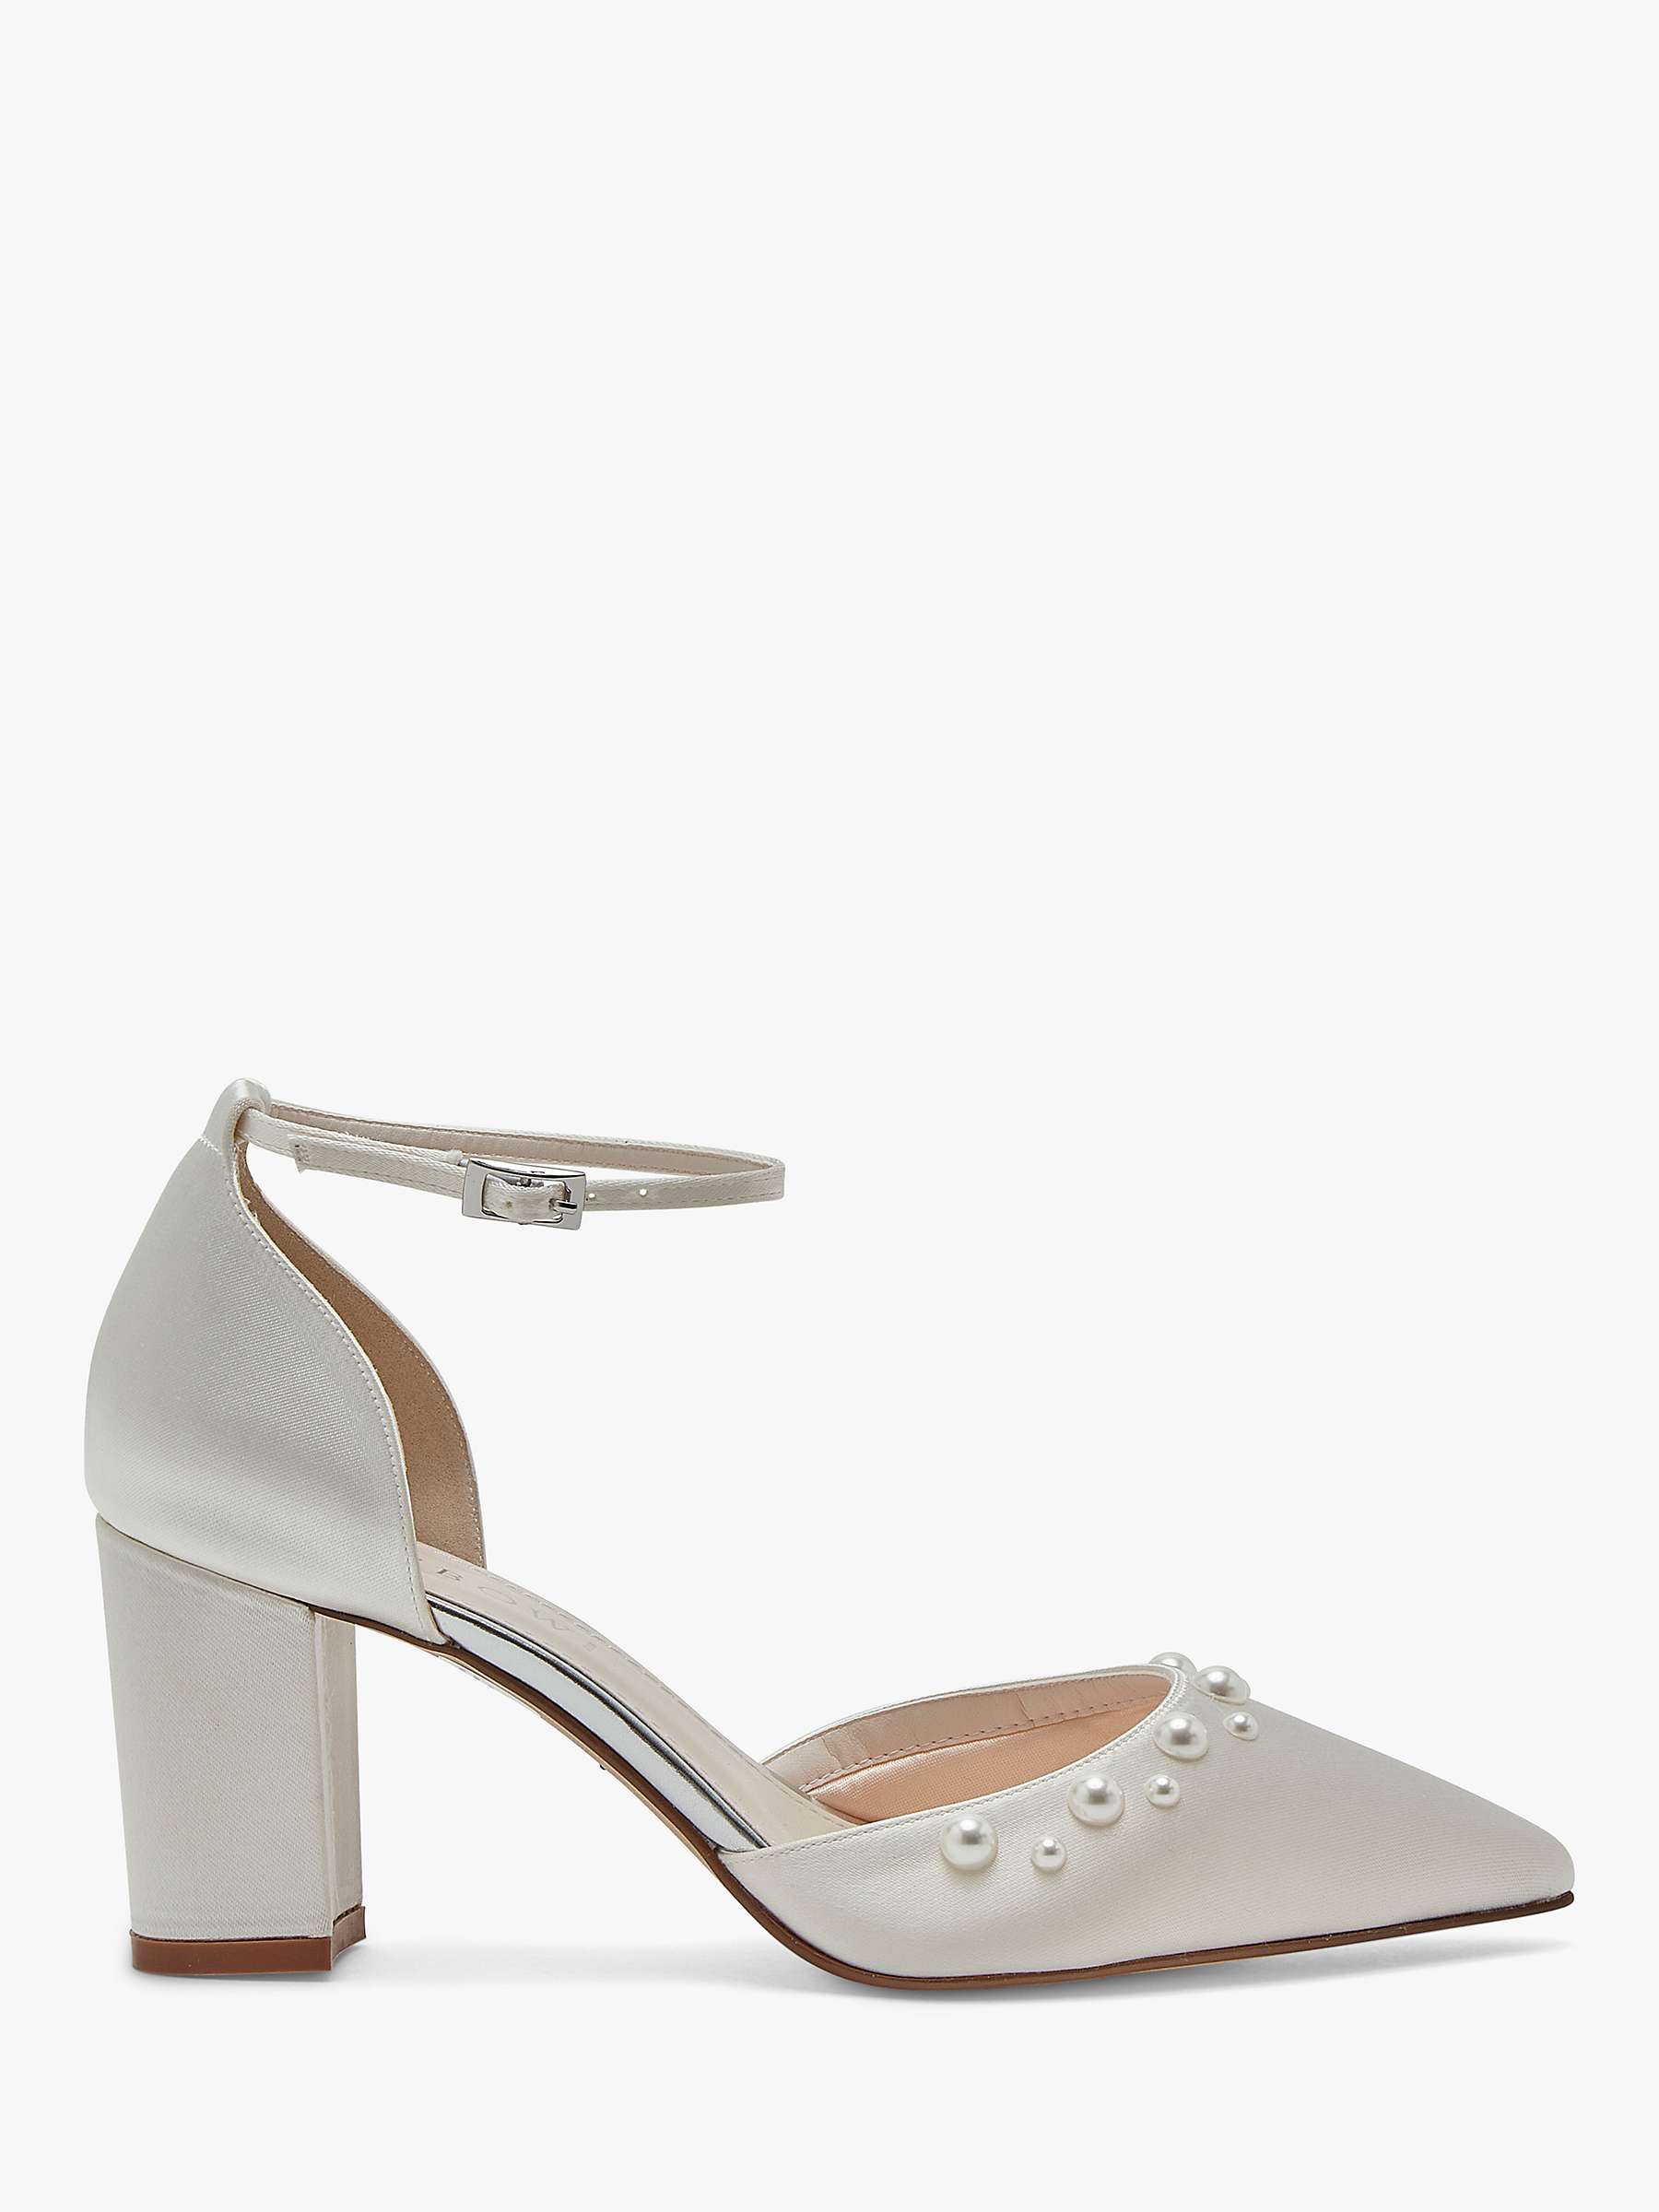 Buy Rainbow Club Hannah Wide Fit Ankle Strap Wedding Court Shoes, Ivory Satin Online at johnlewis.com